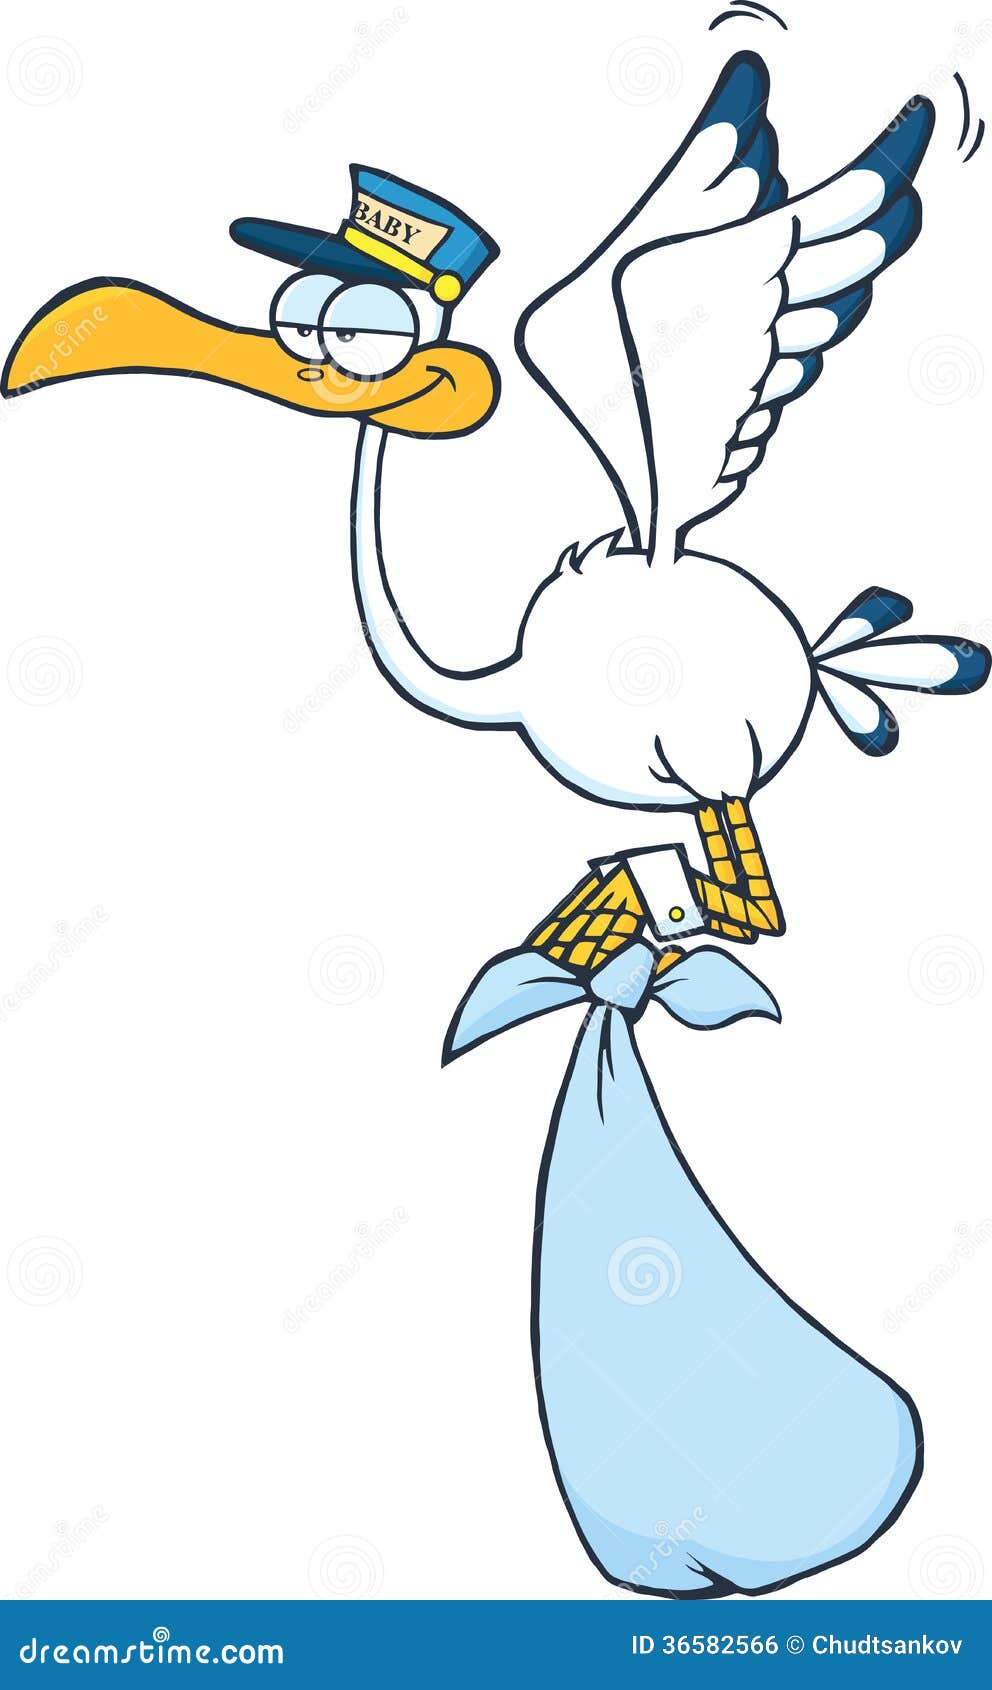 delivery stork clipart - photo #25